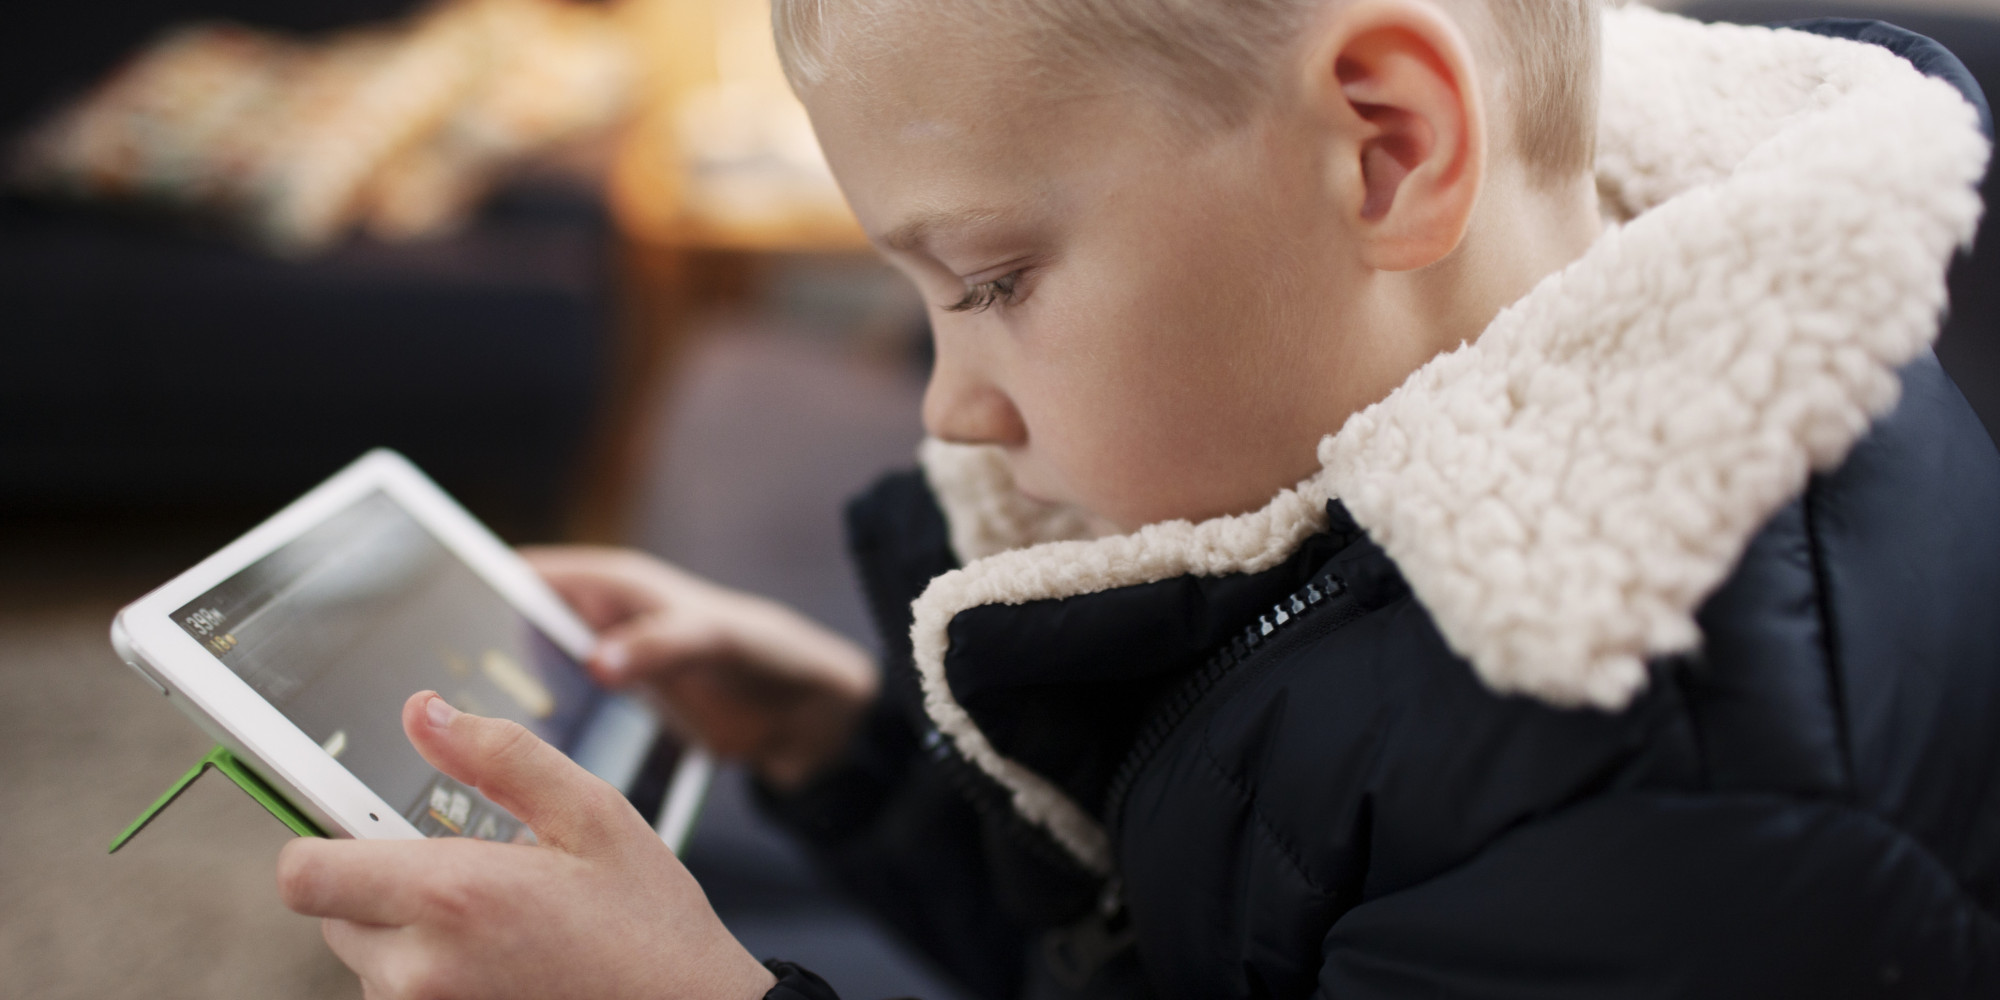 Can We Stop Judging Each Other When Our Tots Play With Tablets? | HuffPost2000 x 1000